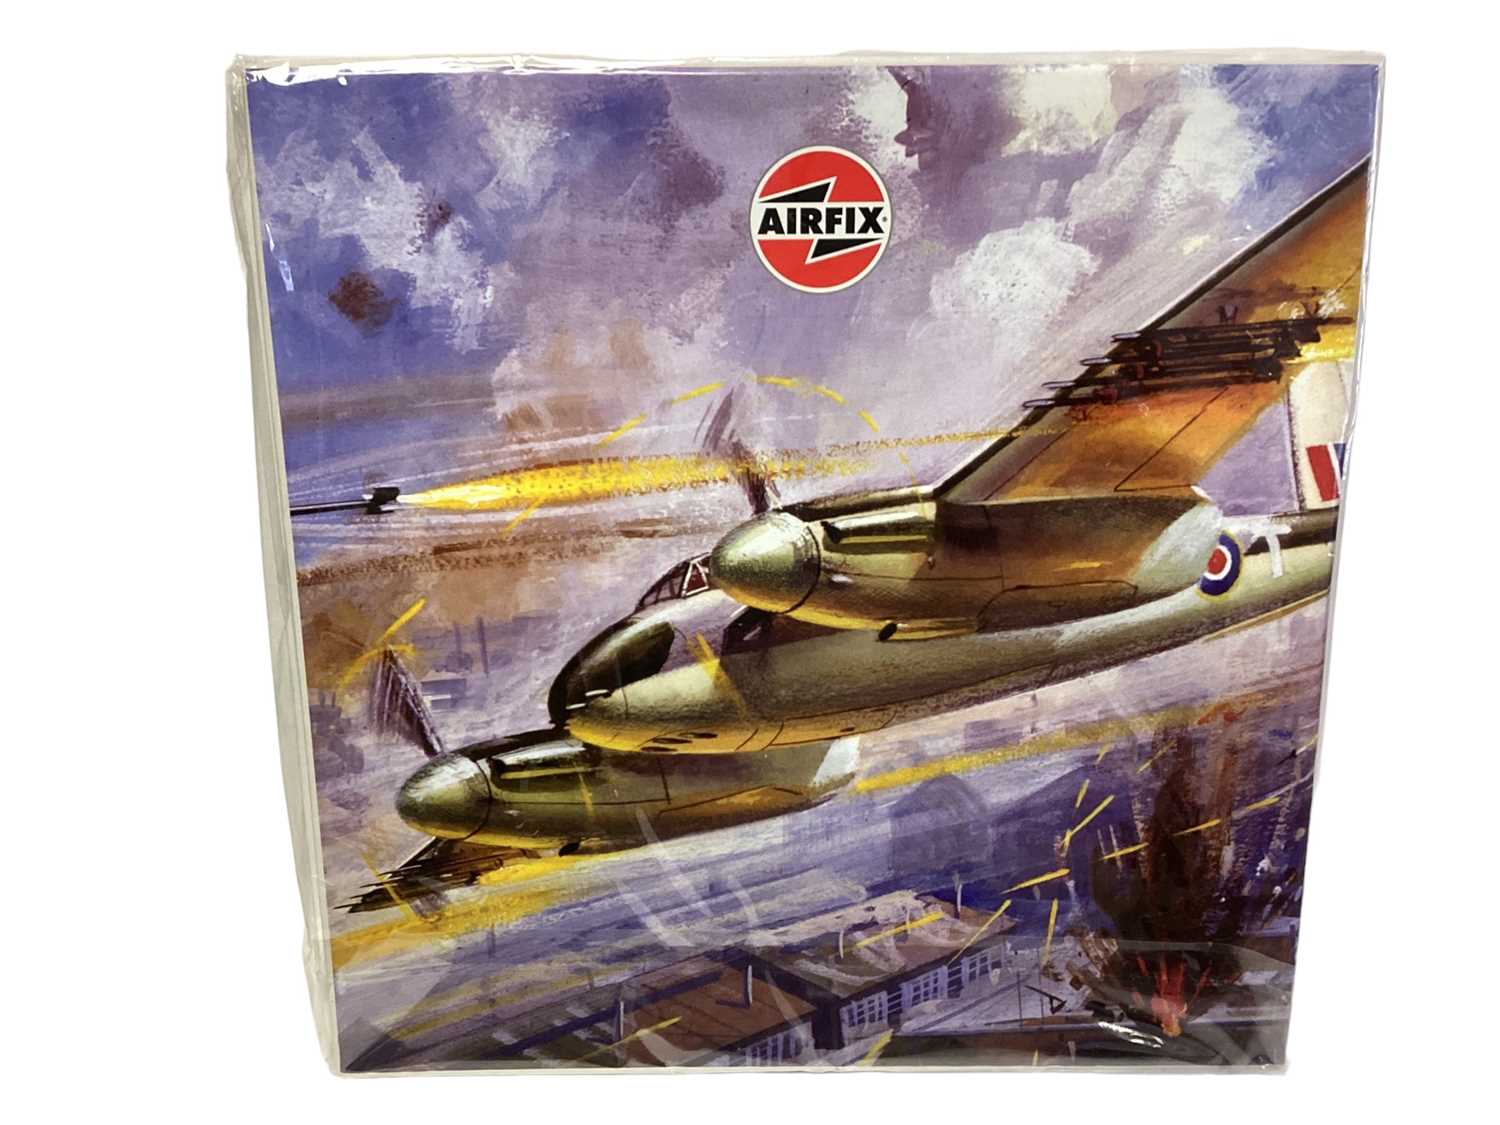 Airfix Large Collapsible Storage Box, with WWII fighter planes design (1) - Image 2 of 2